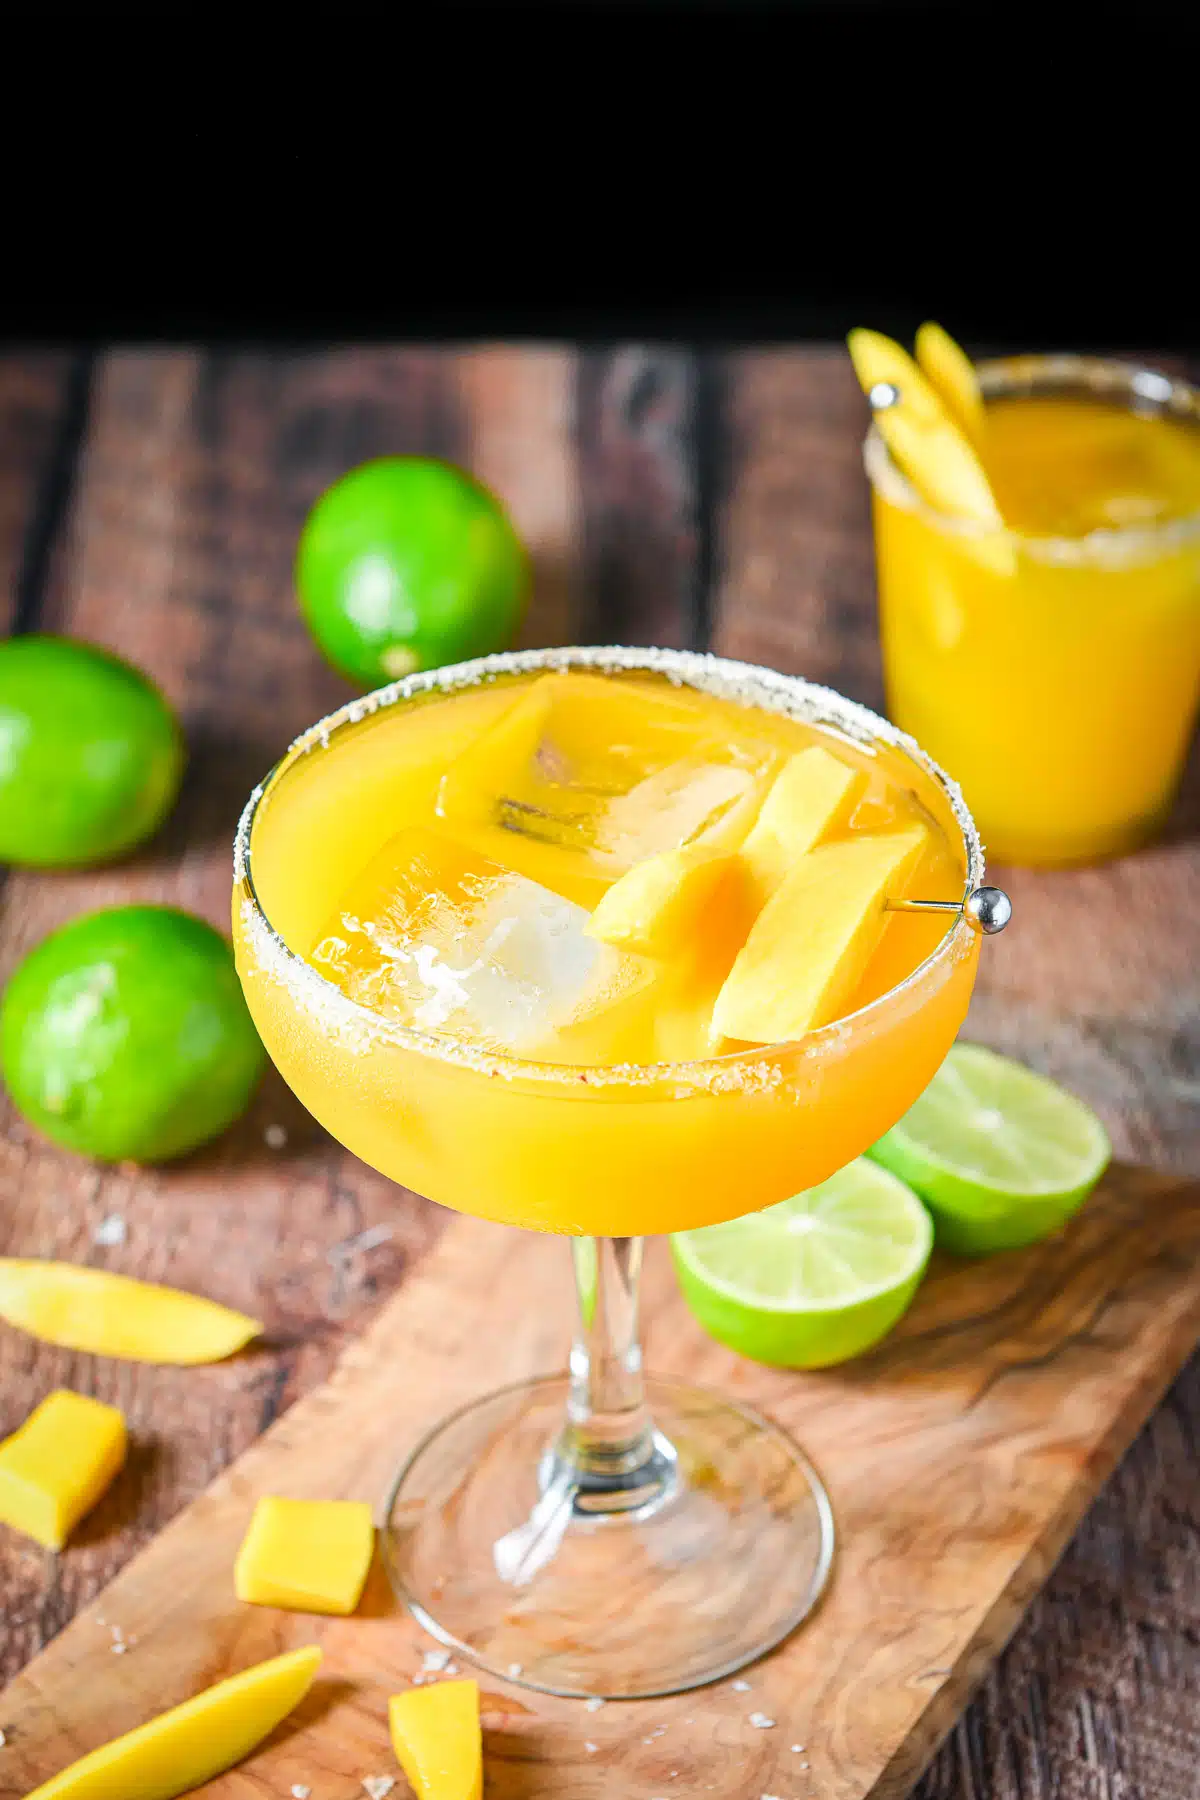 A classic margarita glass with the mango margarita on a board with slices of mango and limes